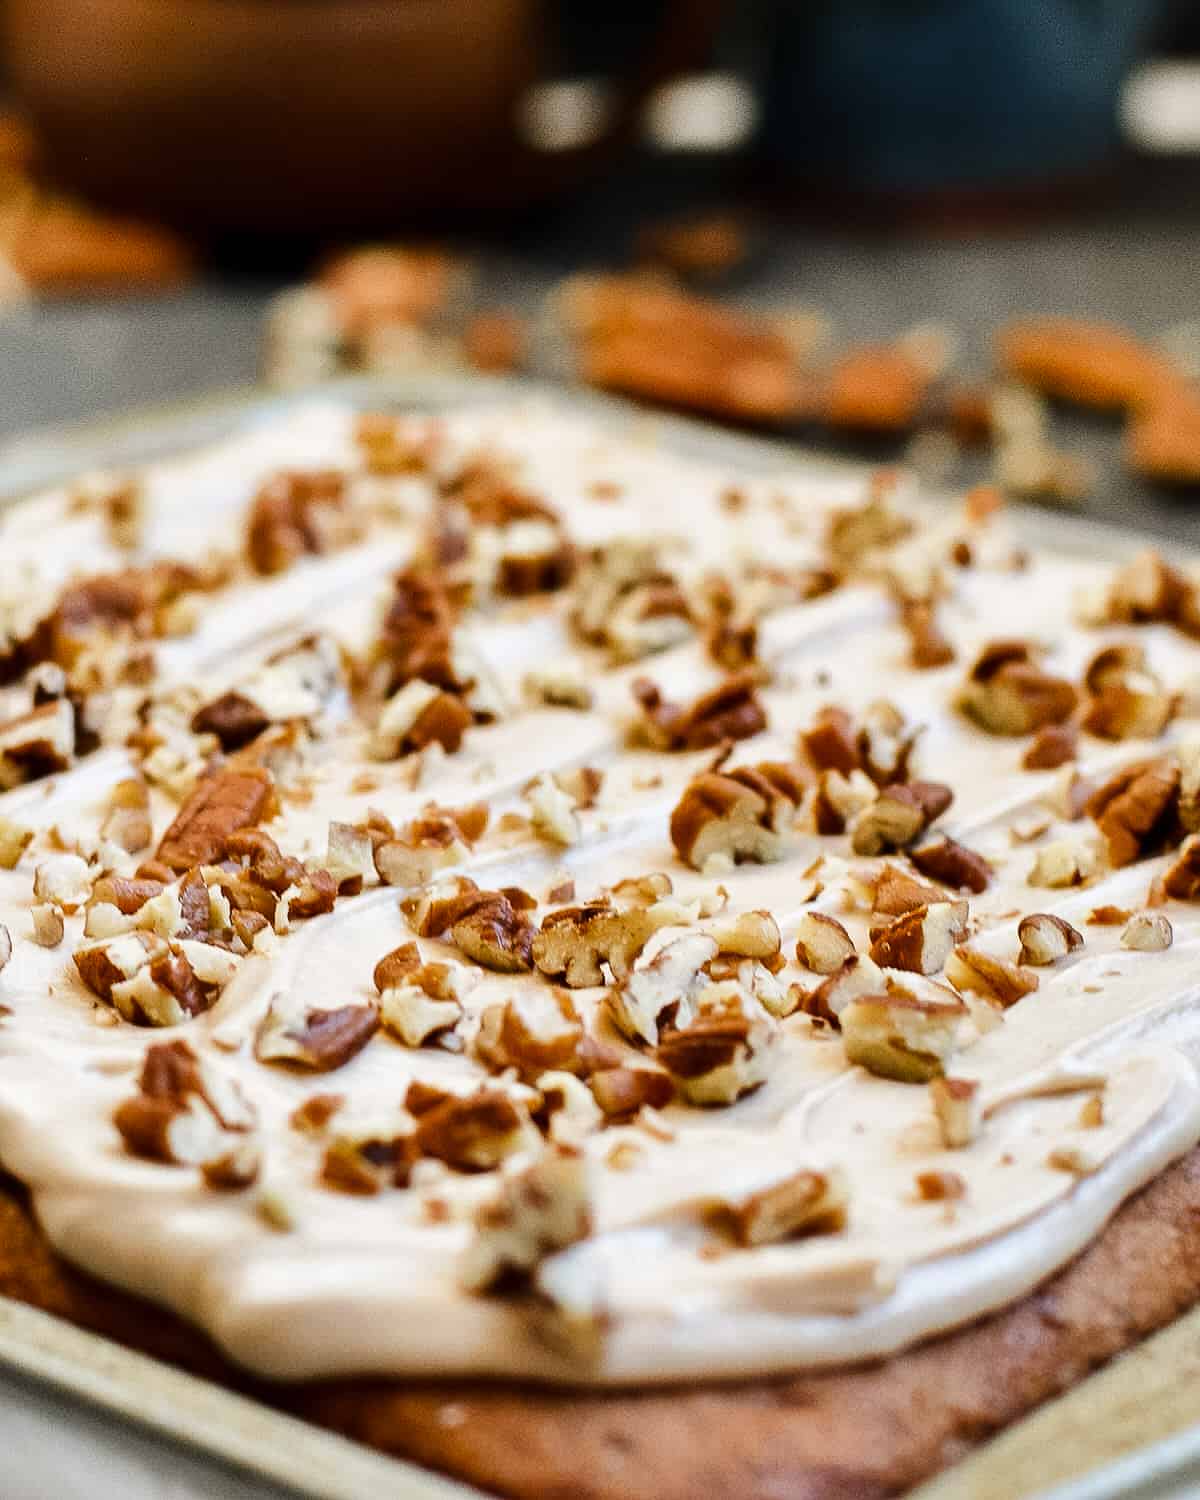 Up close of pecans on top of maple frosting and pecan cake